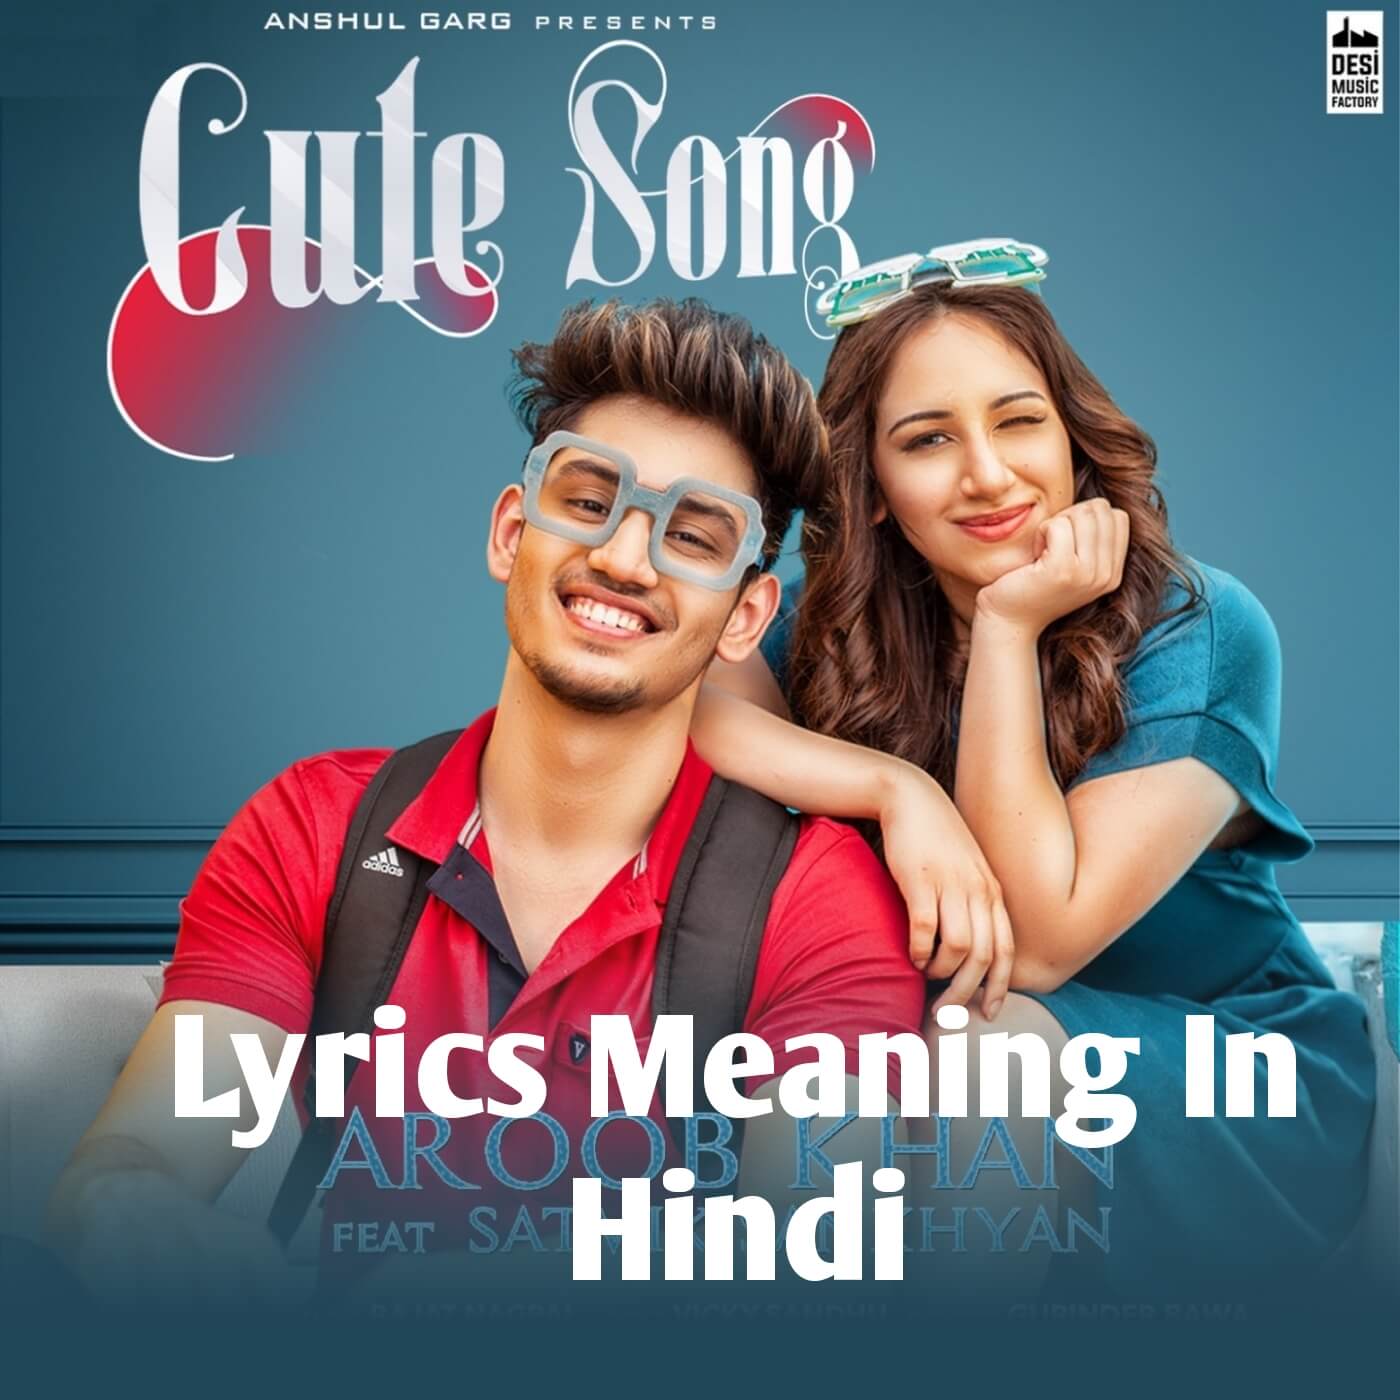 Cute Si Smile Song Meaning In Hindi